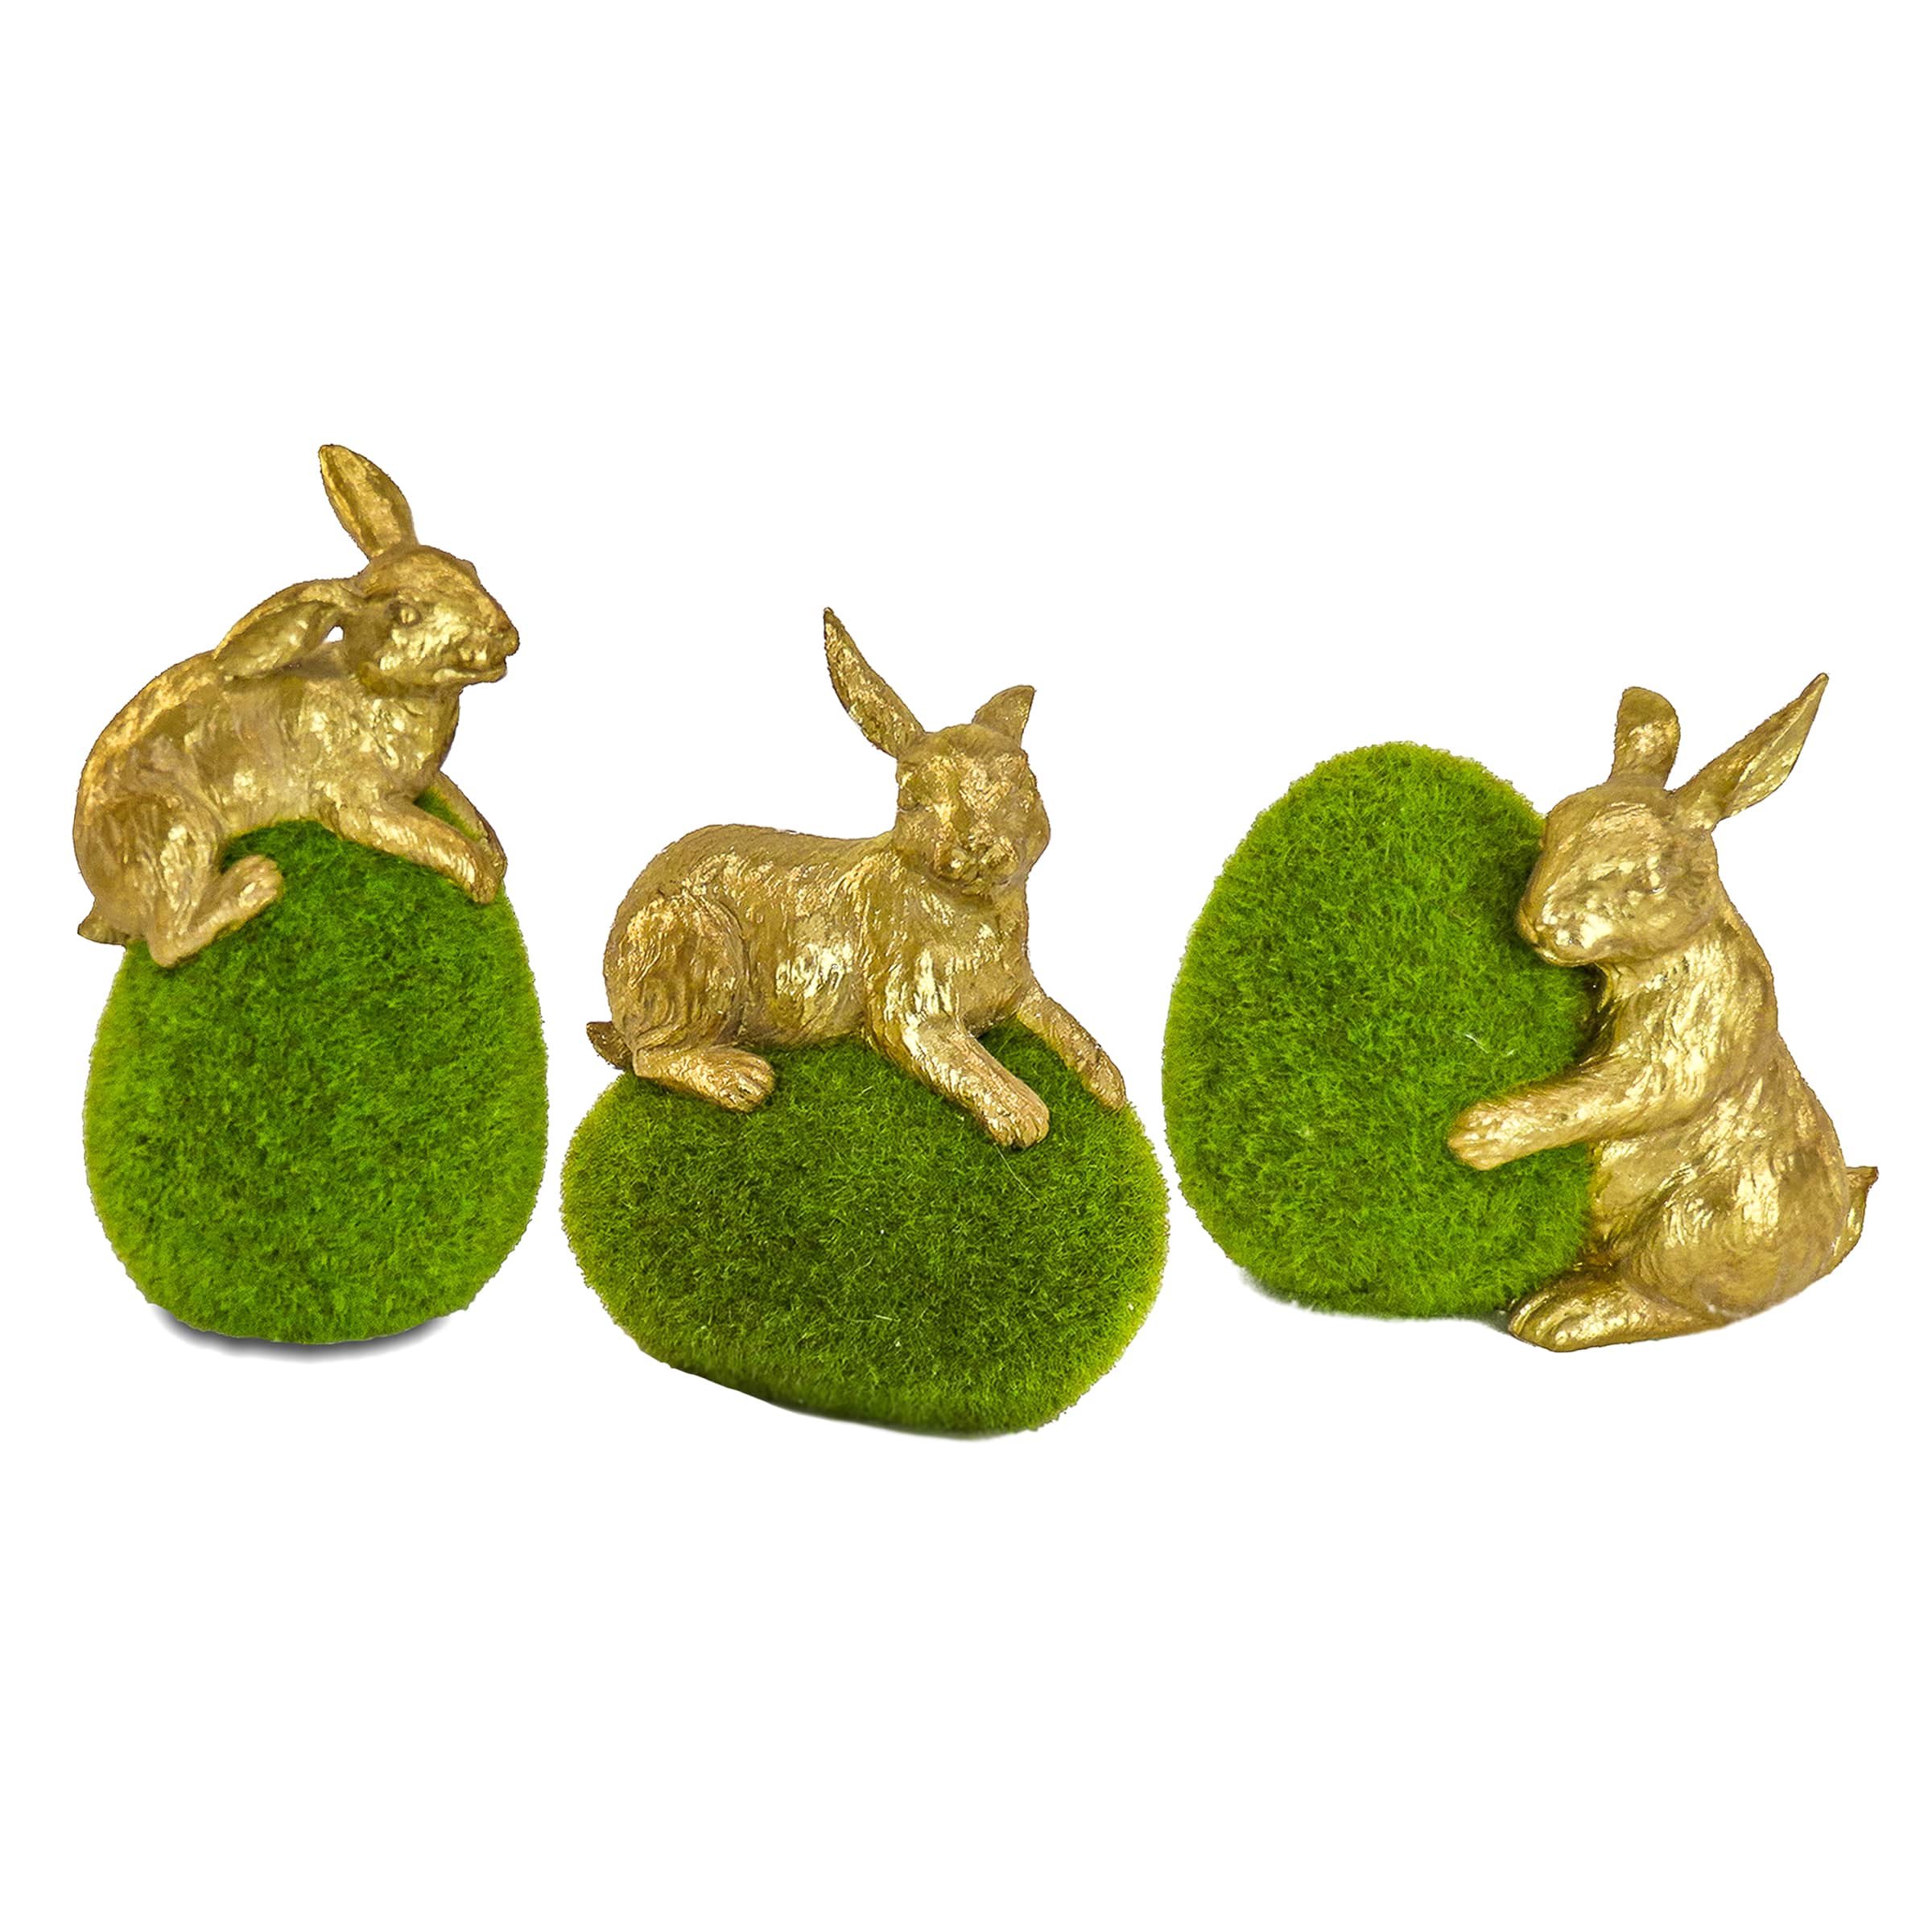 Bunny Craft: DIY Moss Covered Succulent Bunnies for Spring